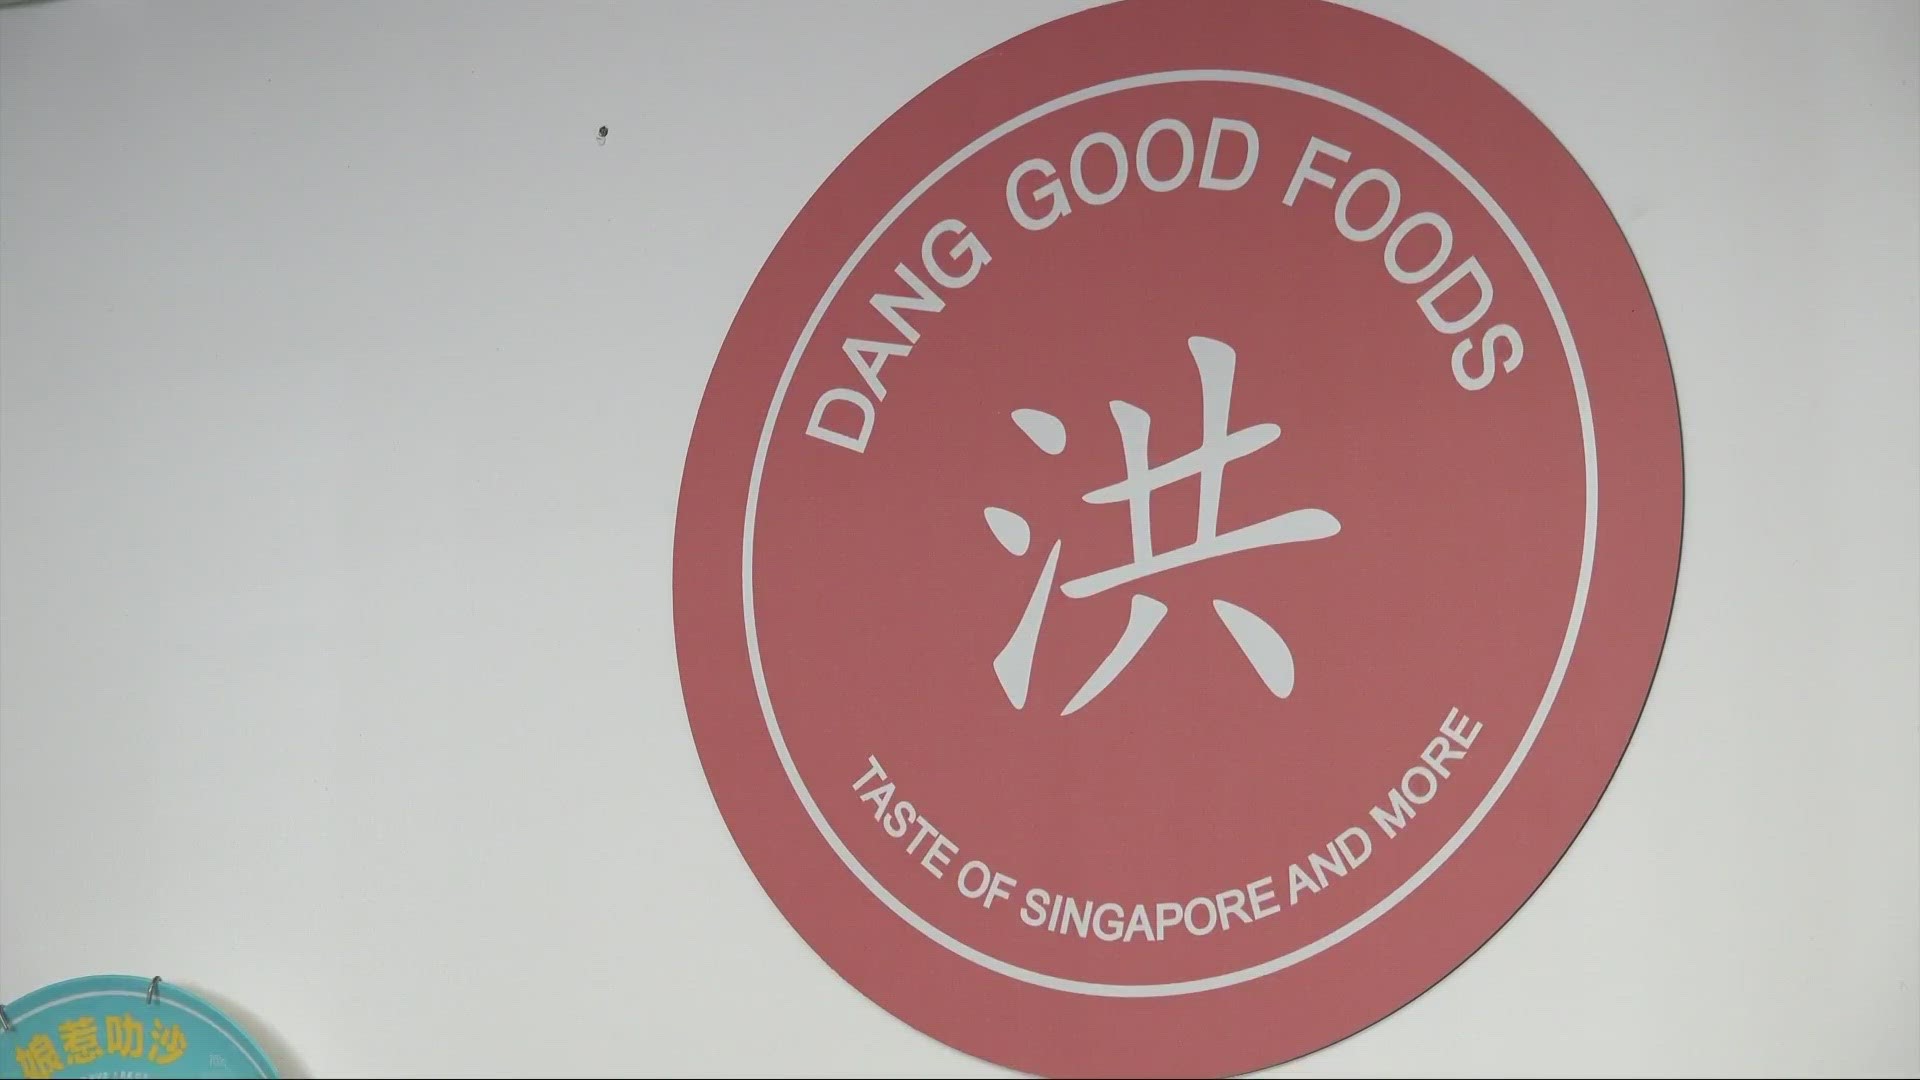 At Dang Good Foods in Lakewood, diners can get a taste of not only Singaporean foods, but a range of Asian and Asian inspired dishes.